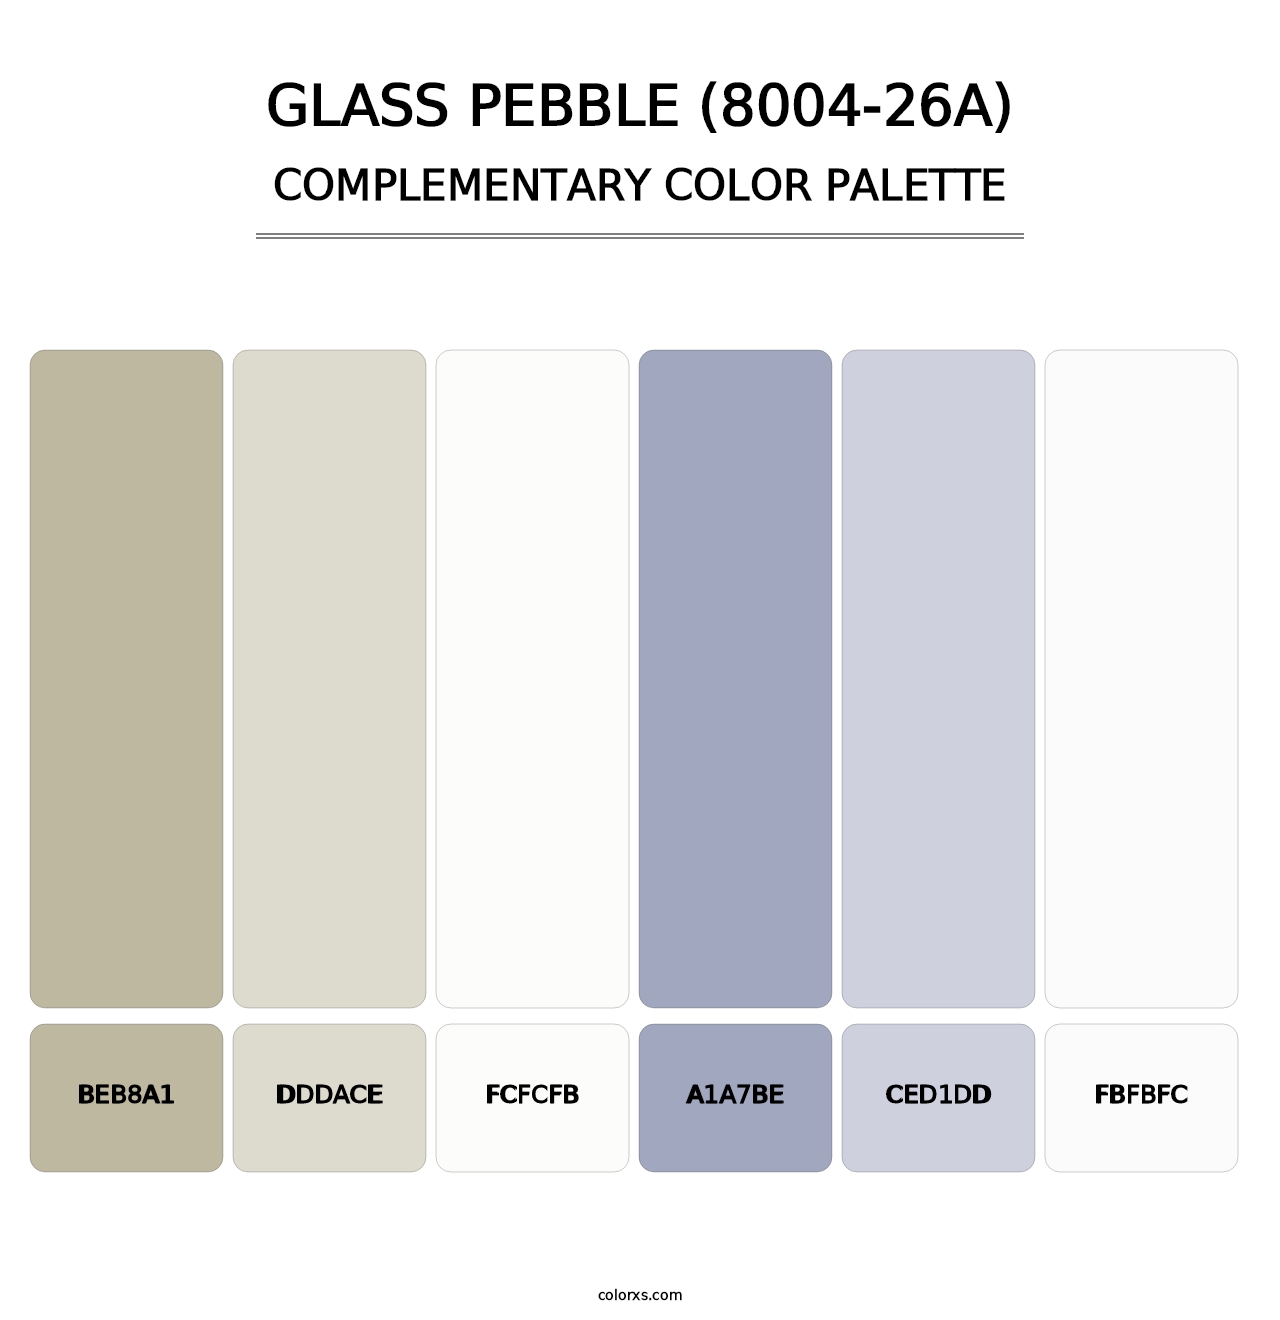 Glass Pebble (8004-26A) - Complementary Color Palette